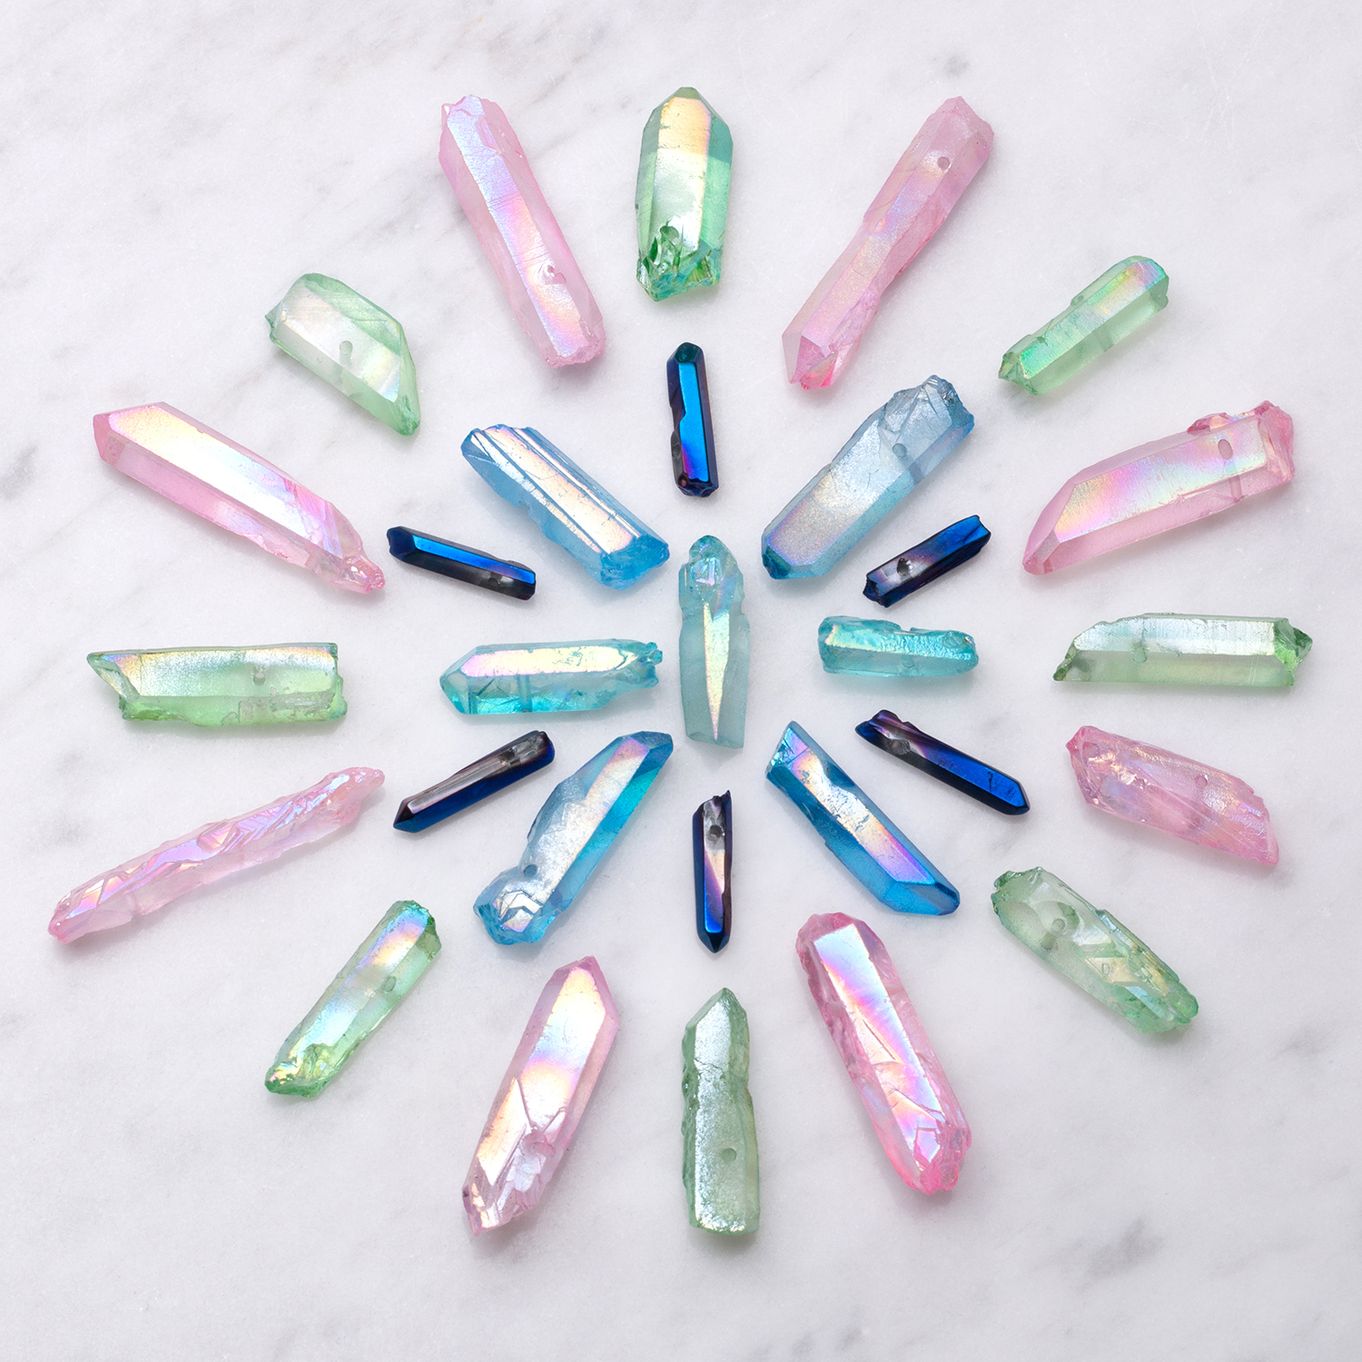 10 Ways We Love to Use Crystal Chips